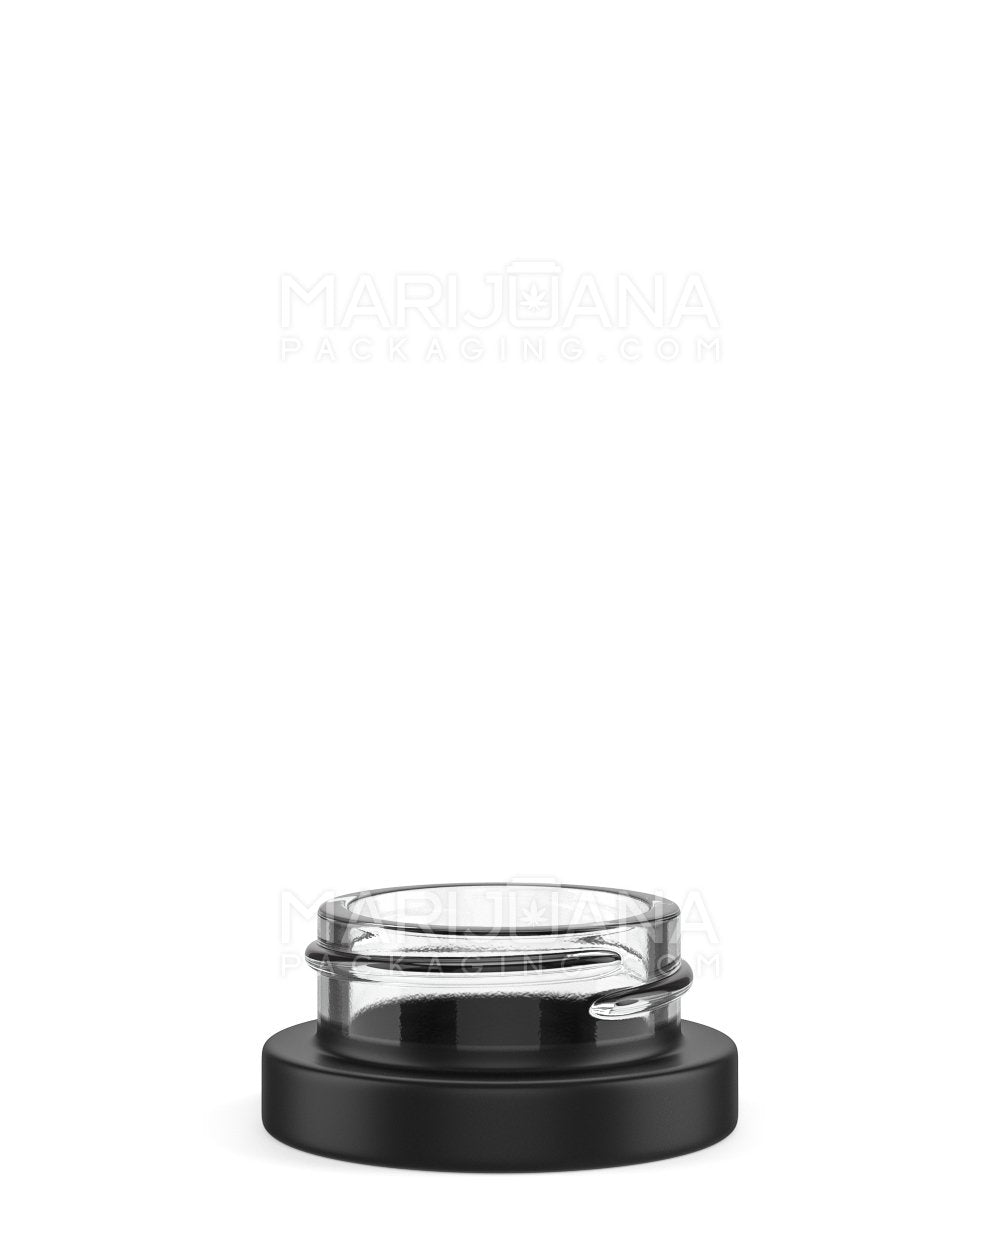 Matte Black Glass Concentrate Containers | 38mm - 9mL | Sample - 1